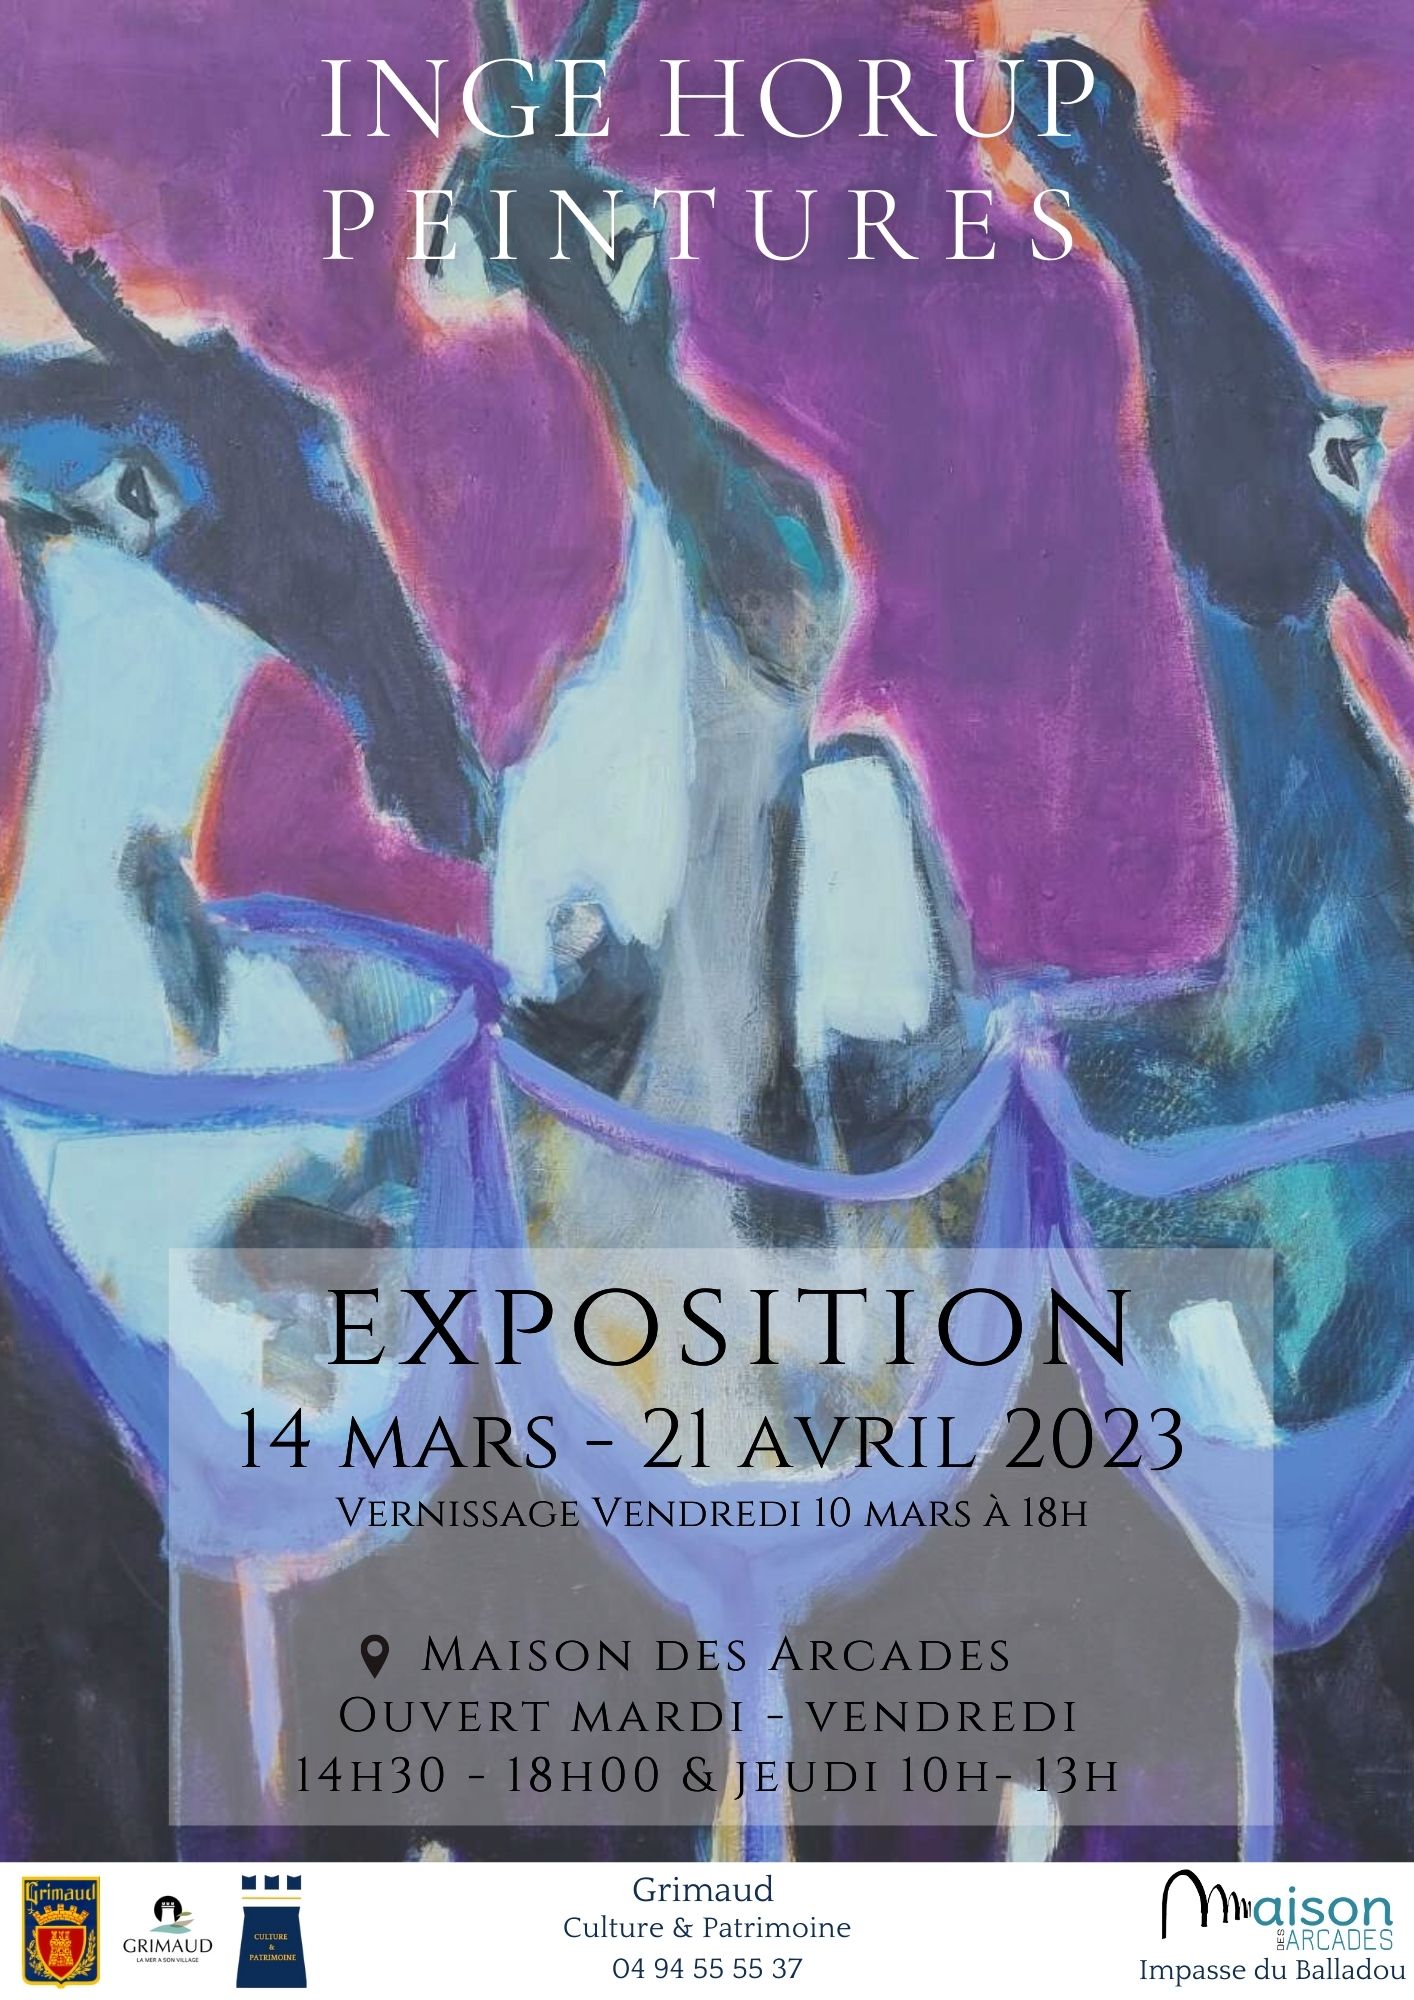 Friday March 10, 2023: Opening of the Inge HORUP exhibition at the Maison des Arcades